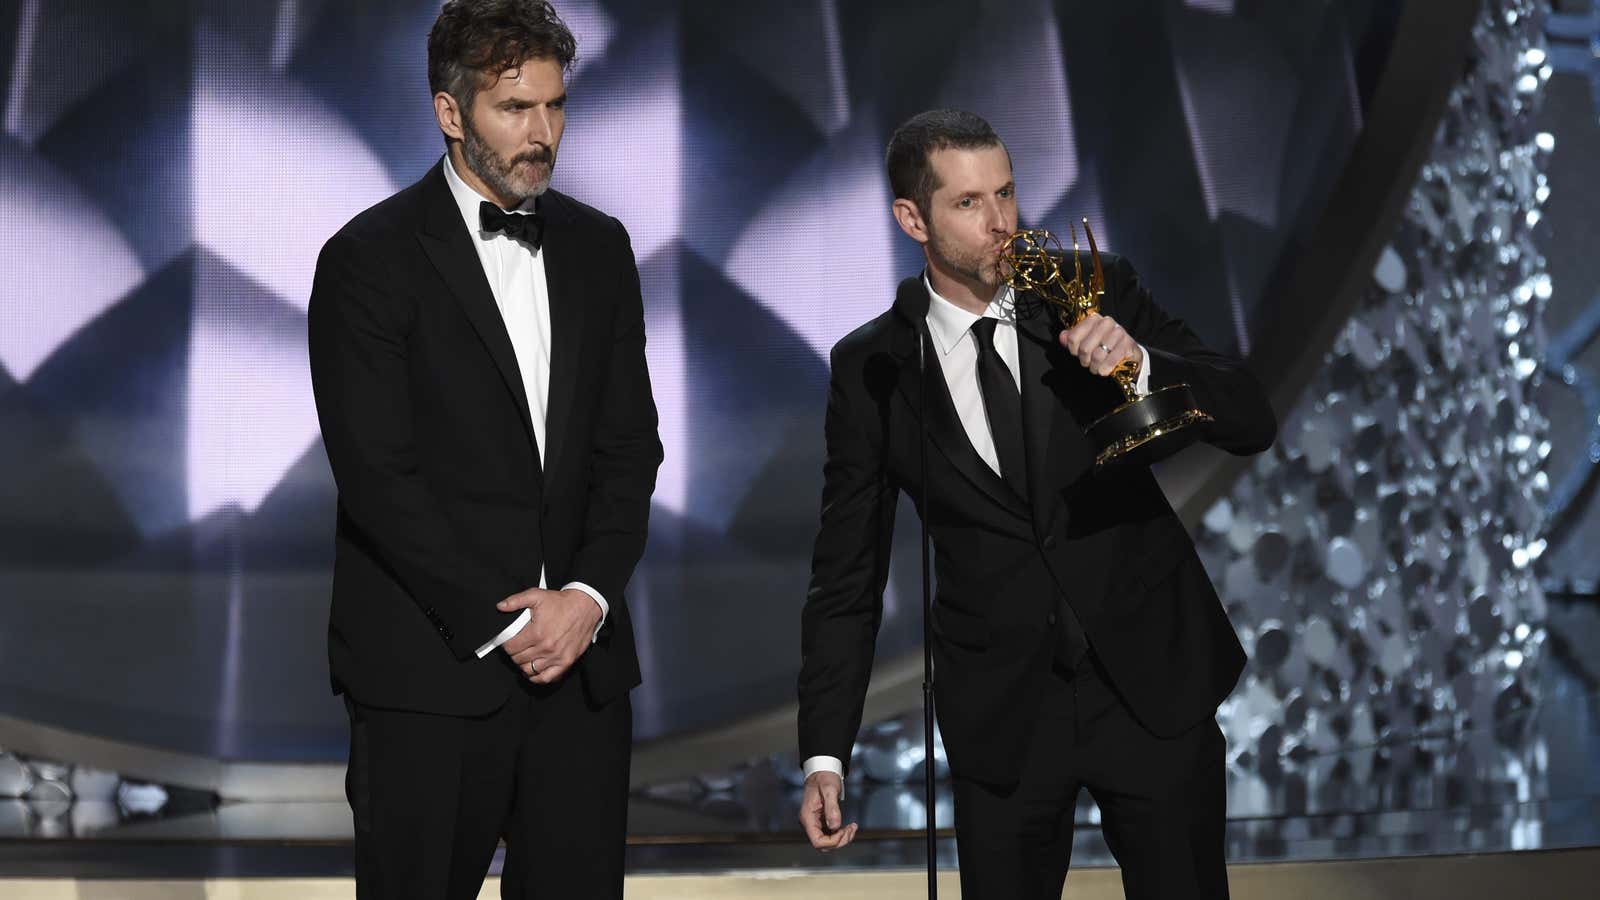 The pair’s “Game of Thrones” follow-up gets a trophy for “most controversial.”